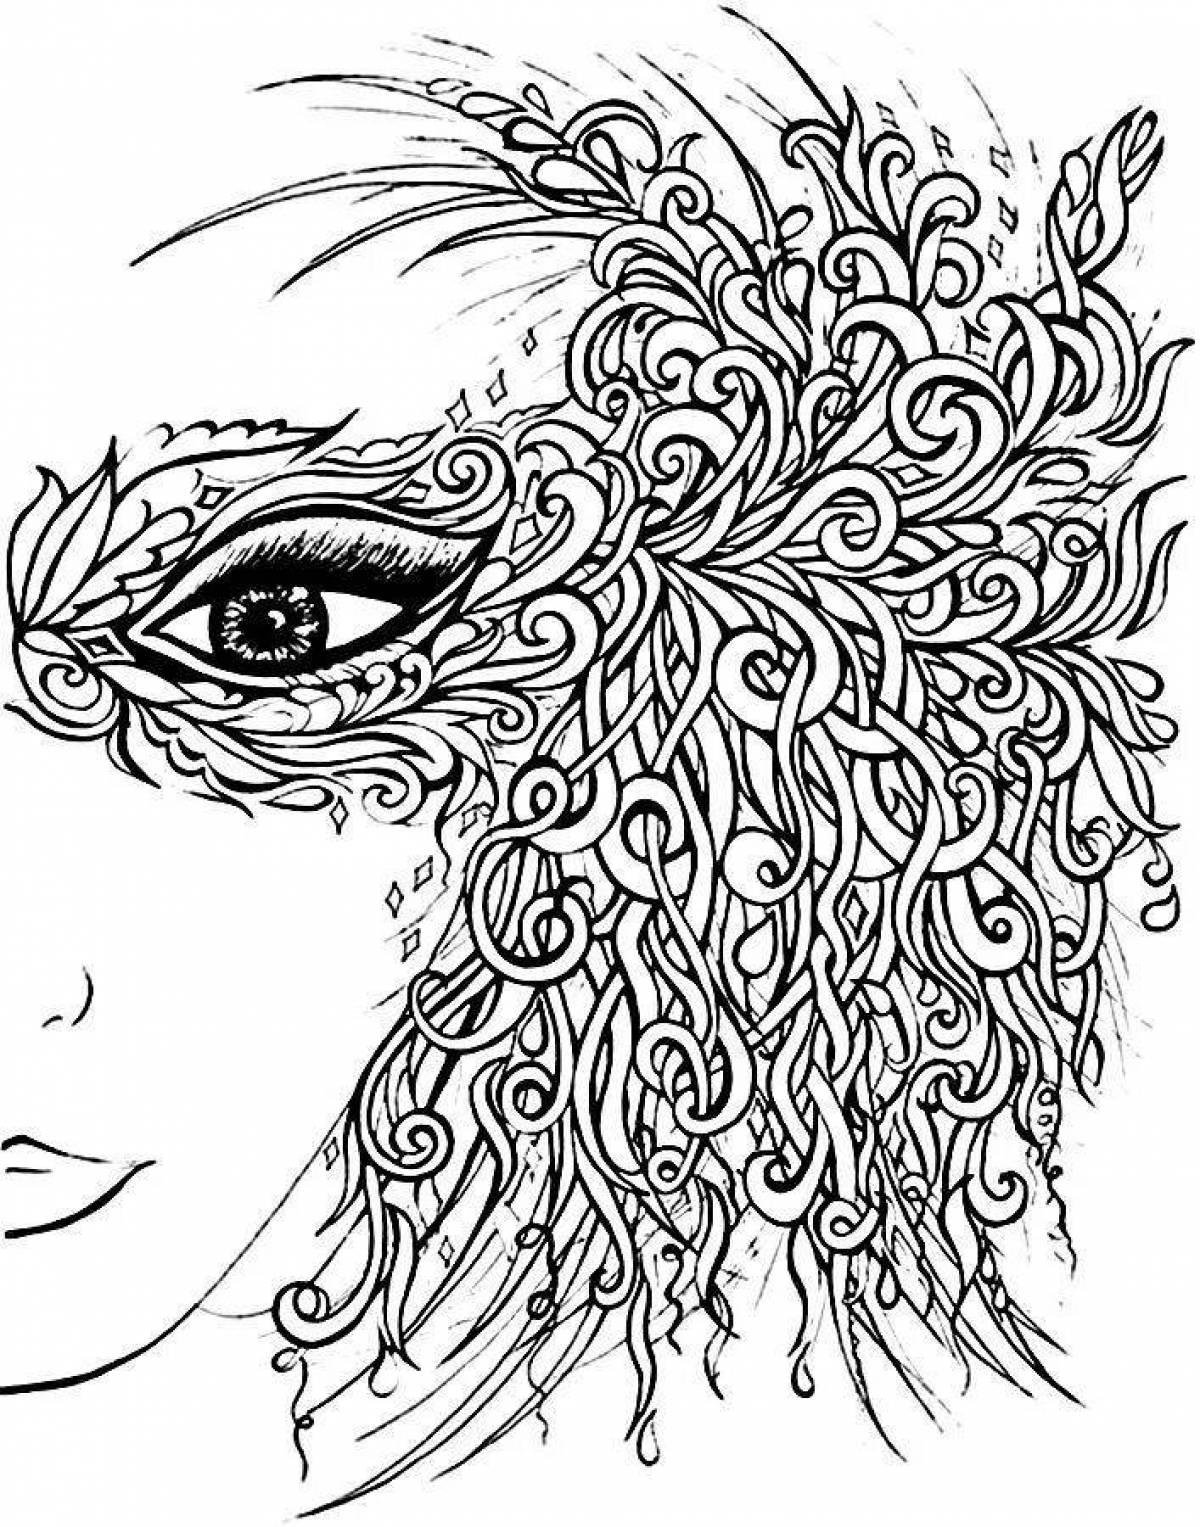 Colourful anti-stress coloring book